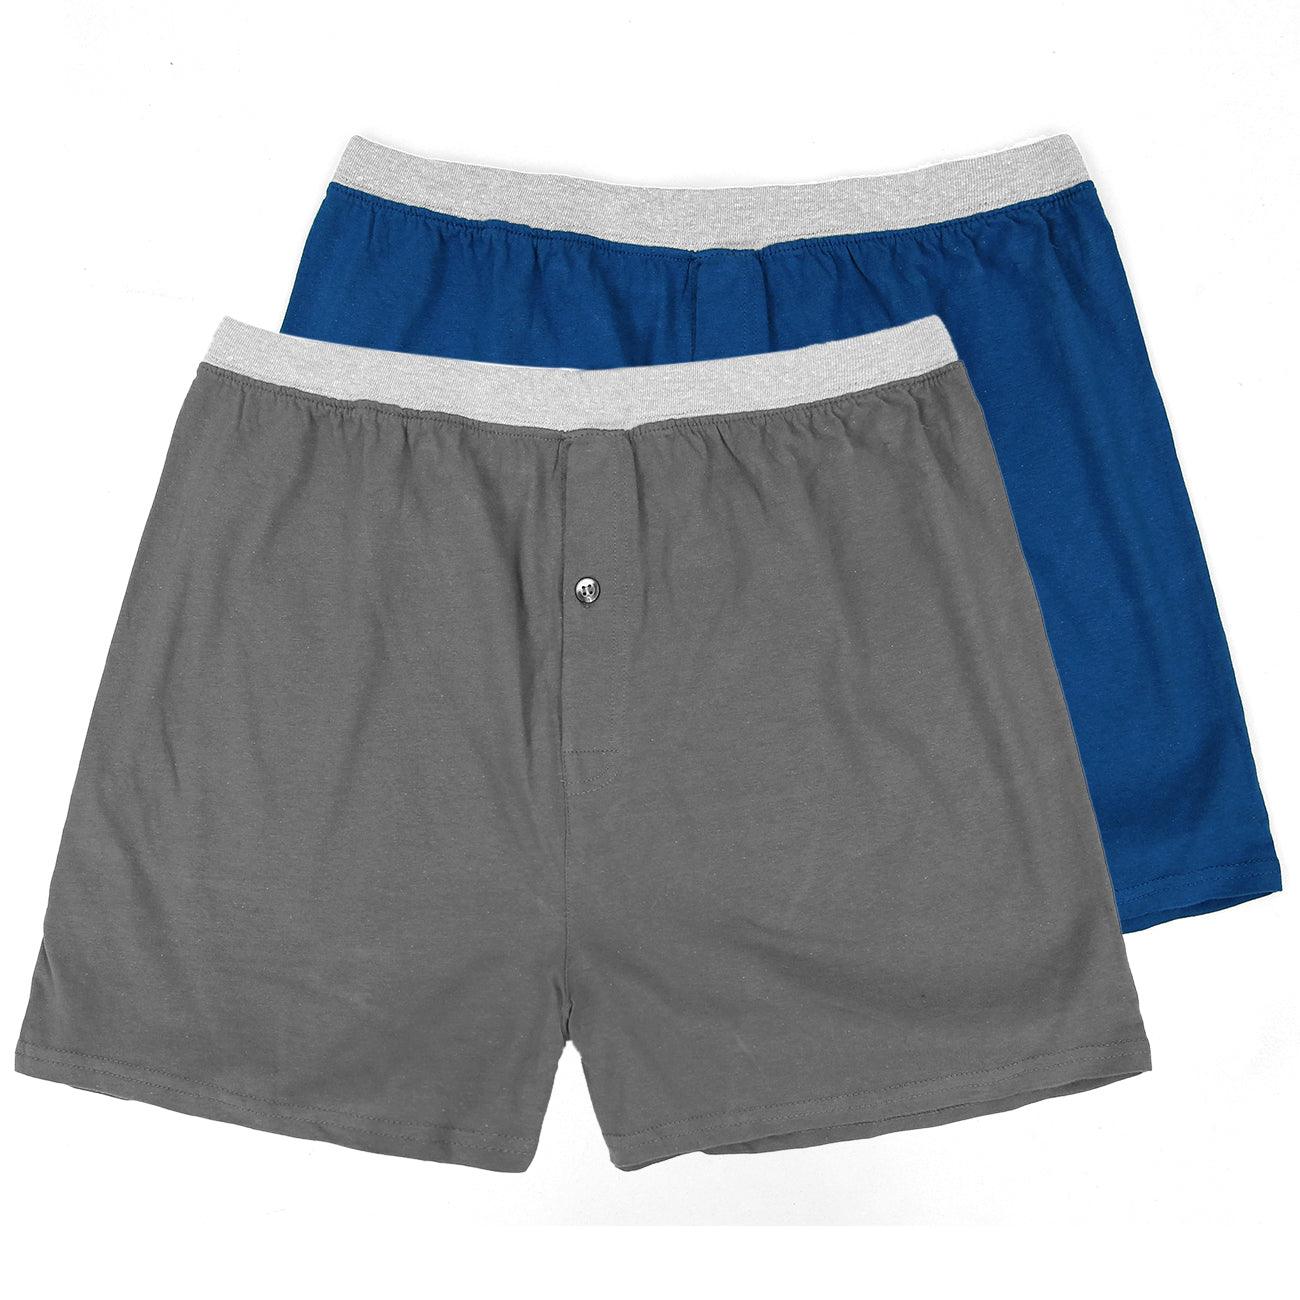 One Button Fly Pack Of 2 Boxer Shorts For Men (FL-11697) - Brands River